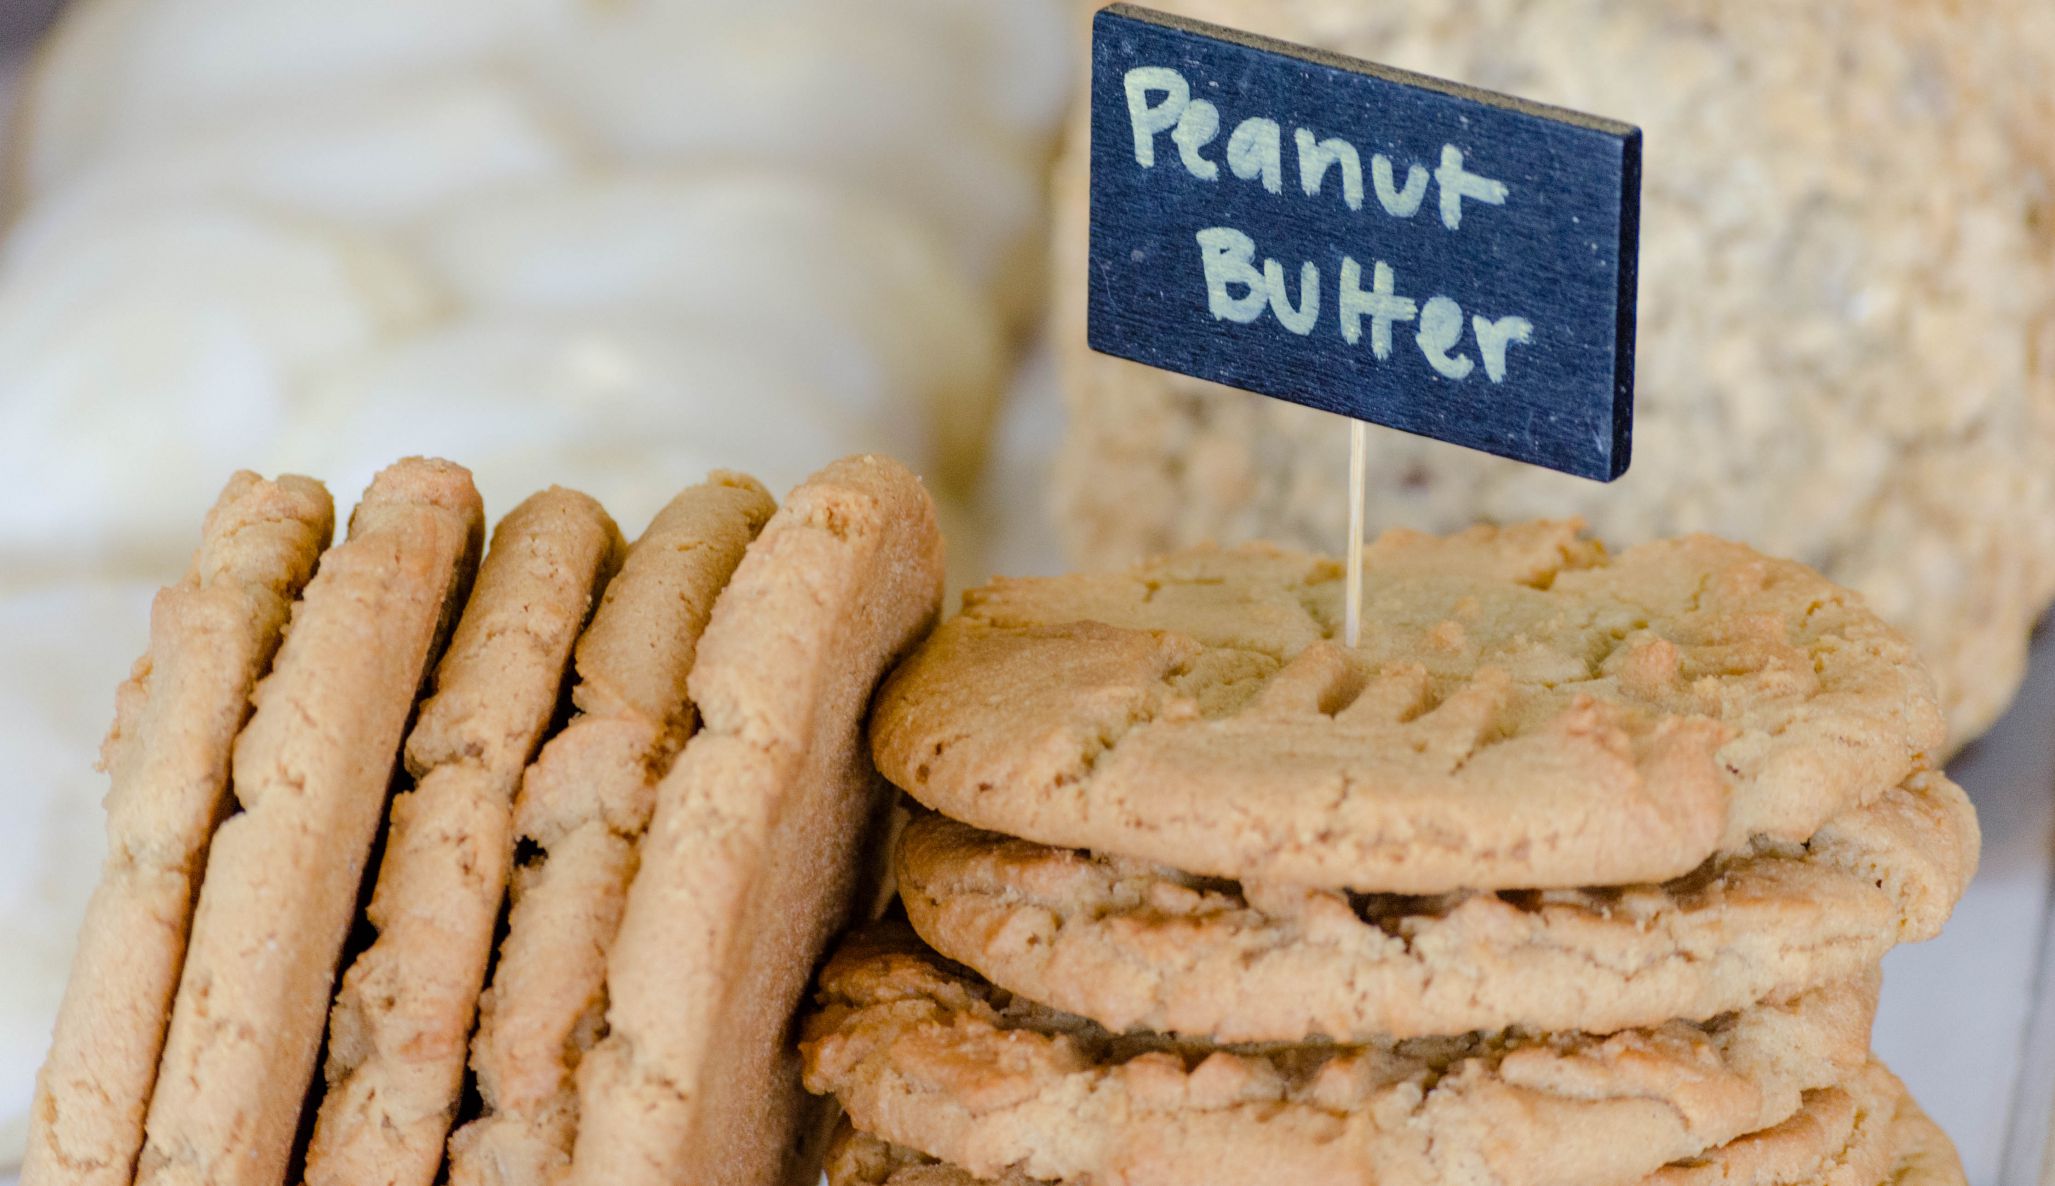 Peanut Butter Cookies from Broadway Daily Bread at Alamo Heights.jpg